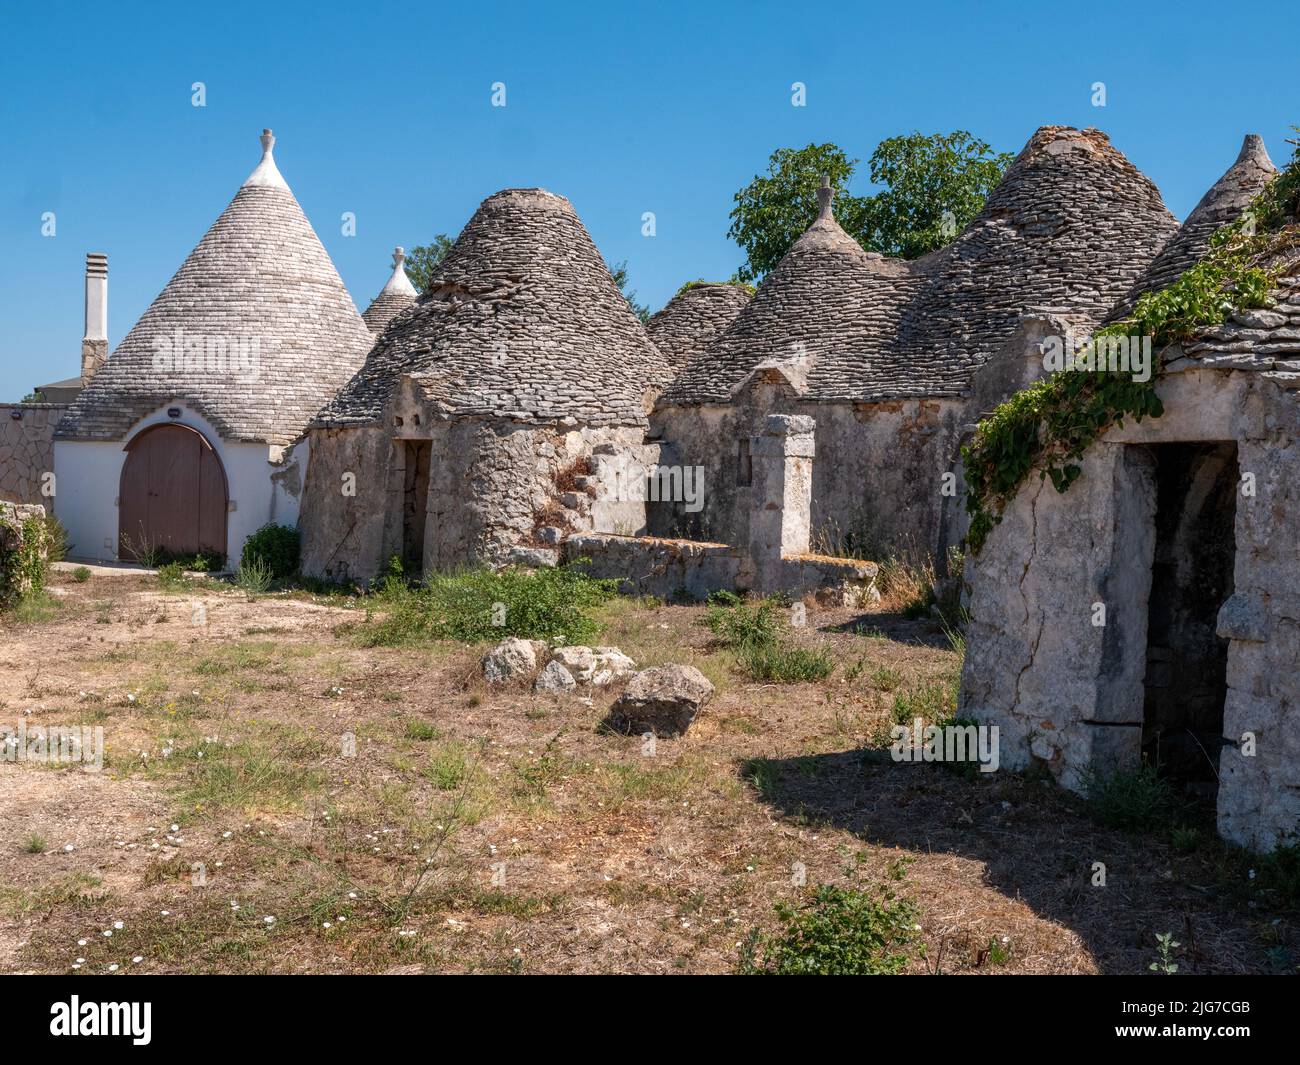 Trulli houses of Alberobello region of Puglia with conical roofs originating in prehistoric times made of limestone boulders and mortarless Stock Photo